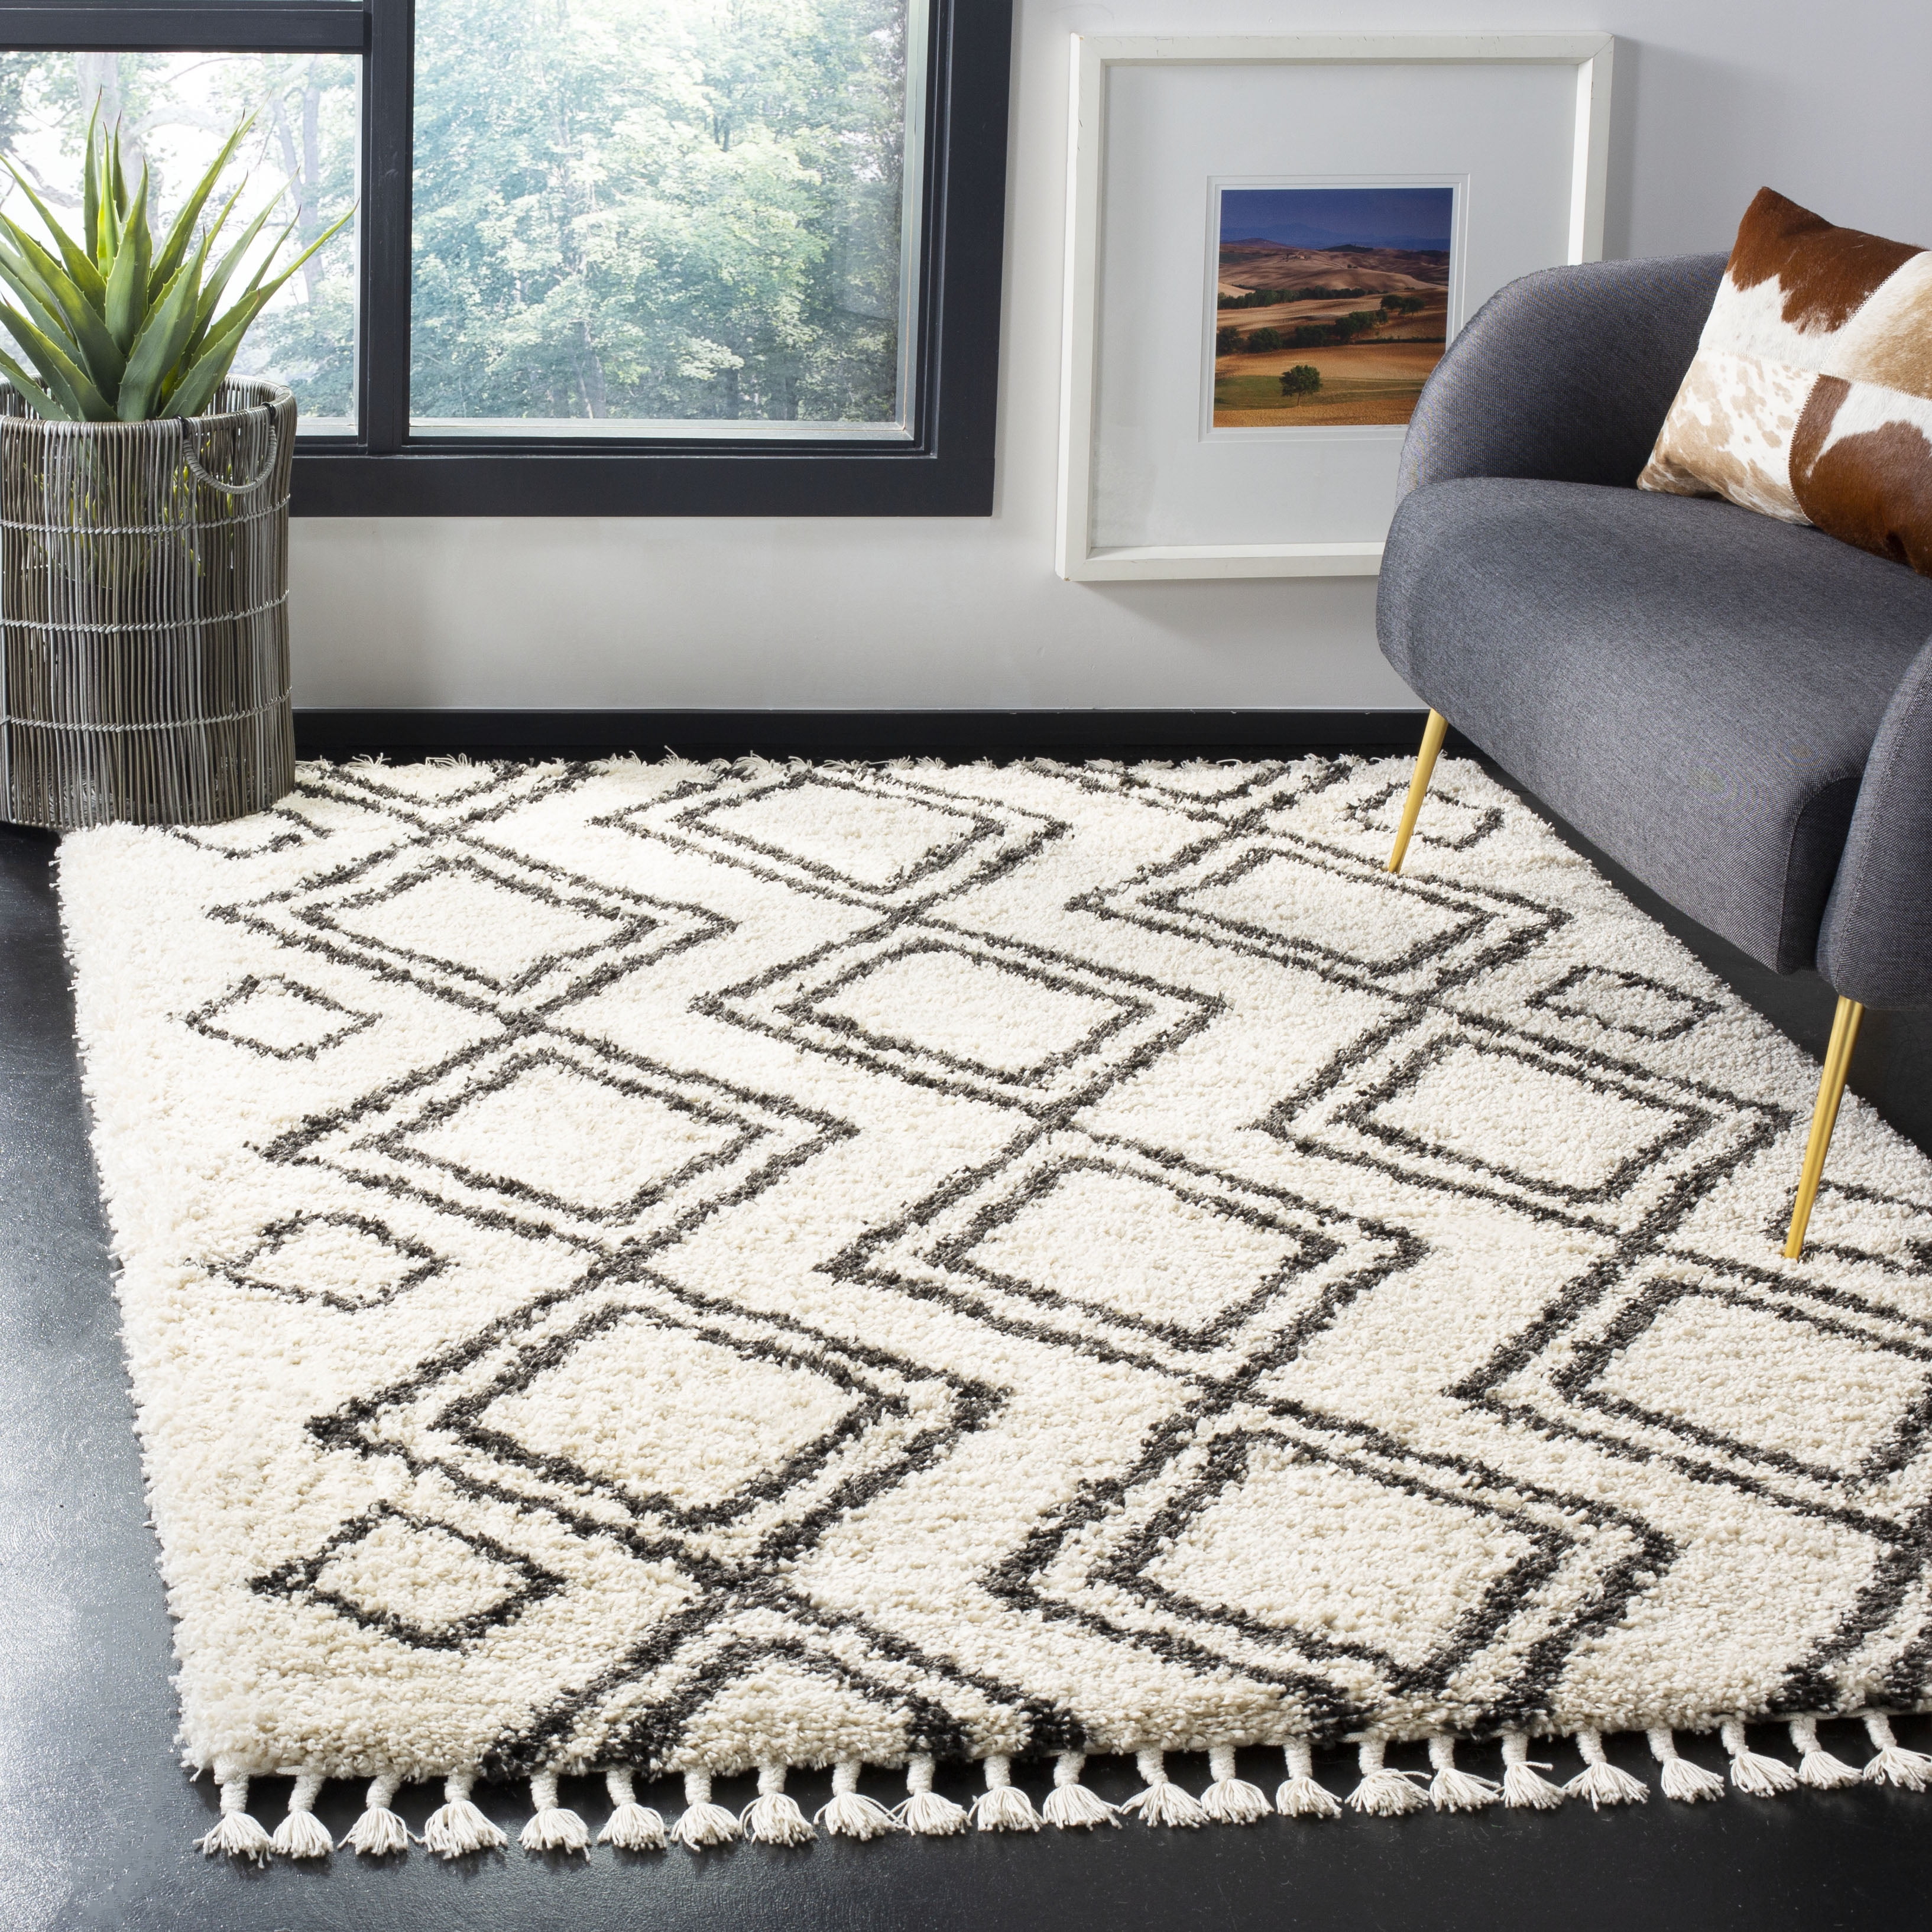 Selma Moroccan Design Charcoal Grey Shaggy Floor Rug 5 Sizes **FREE DELIVERY** 